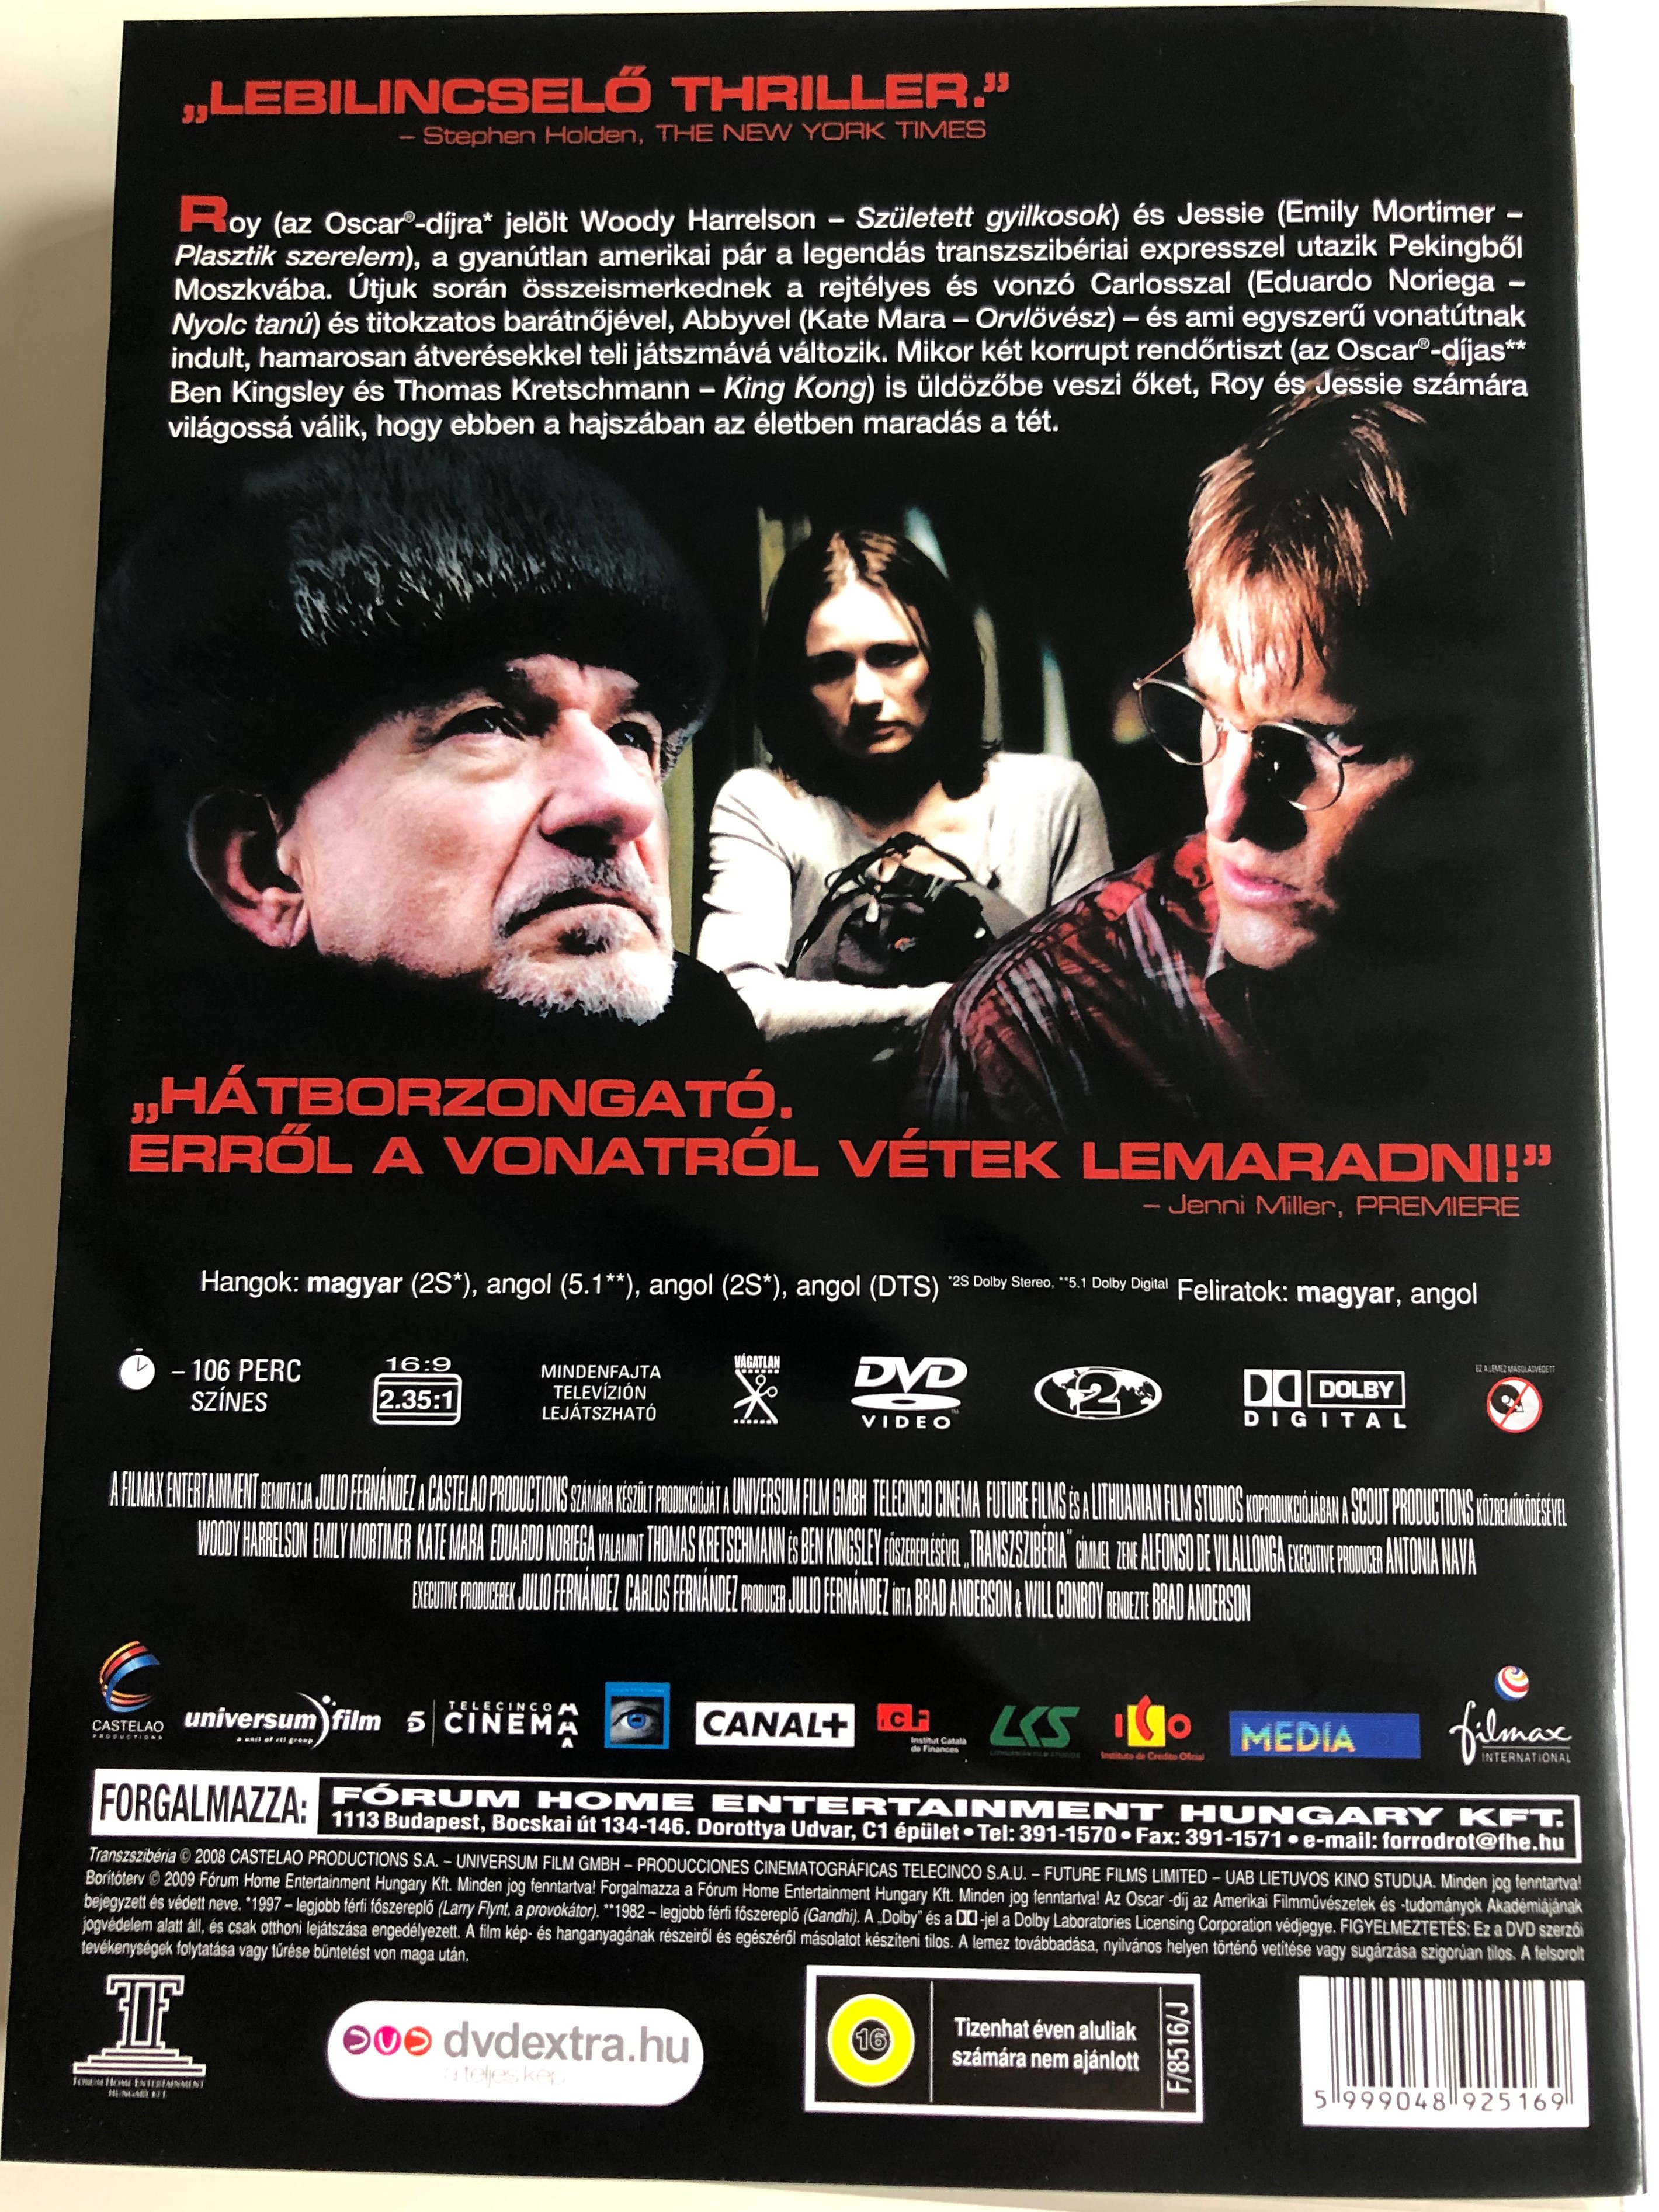 Transsiberian DVD 2008 Transz szibéria / Directed by Brad Anderson